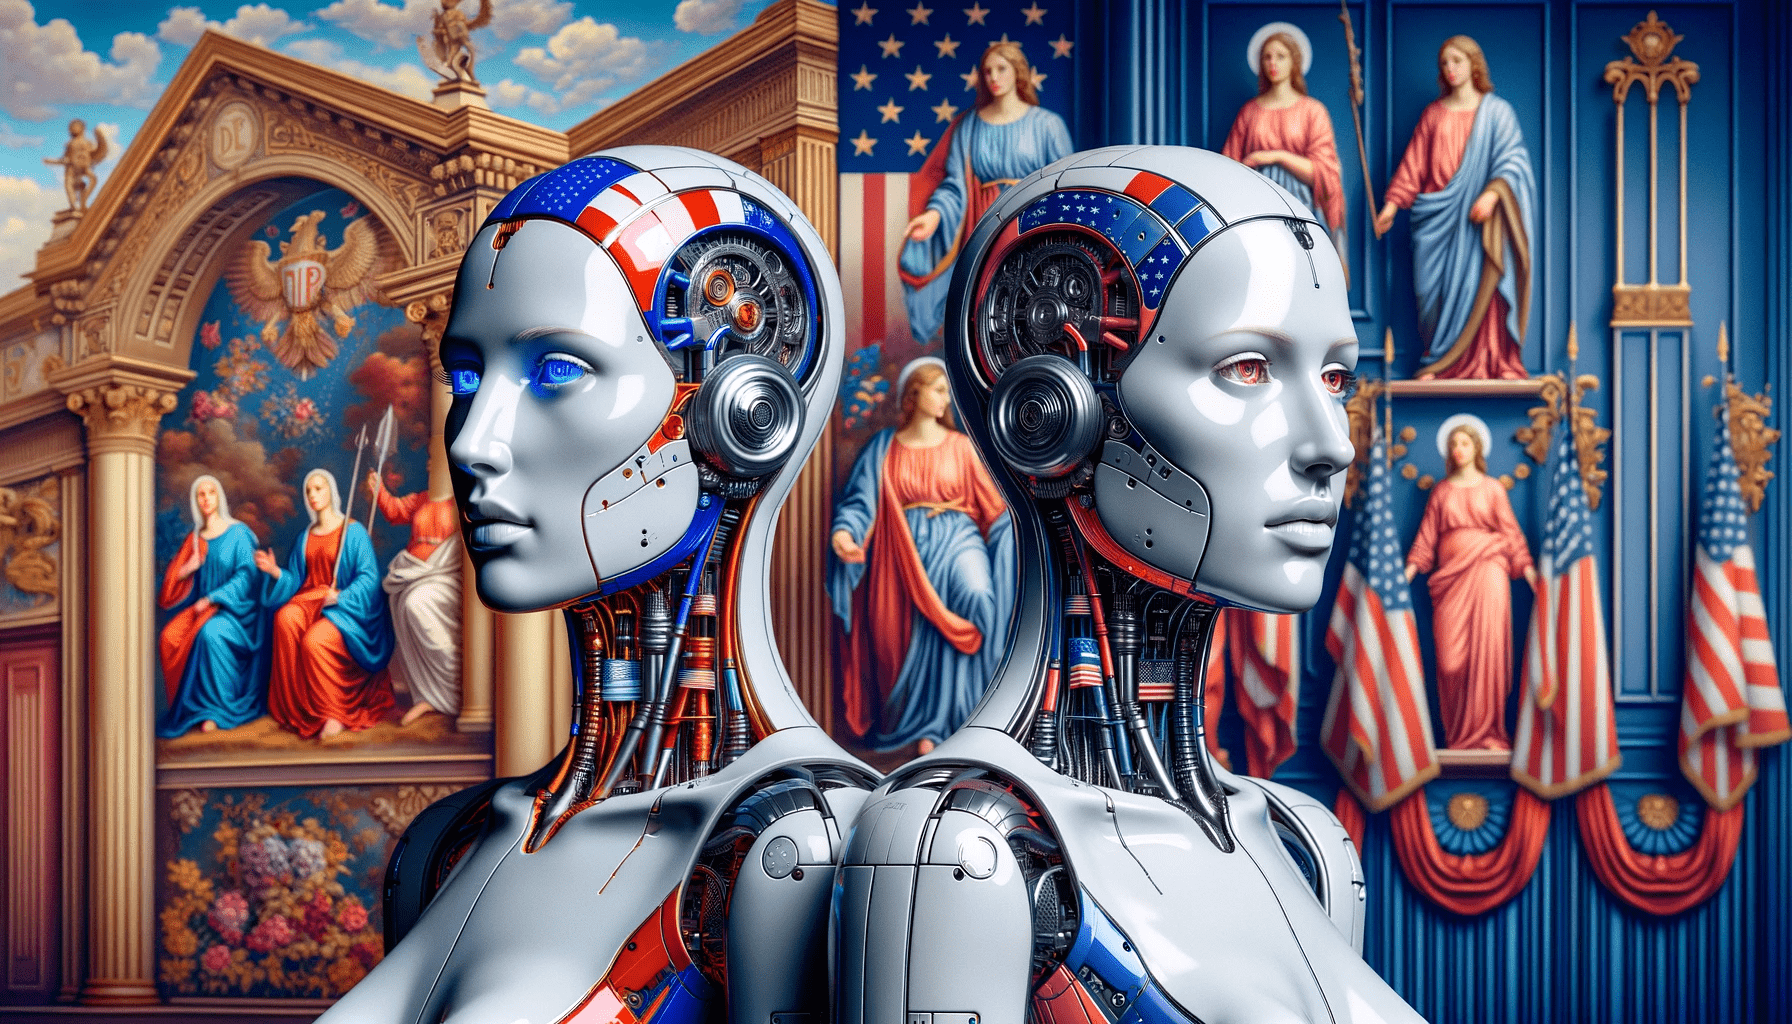 Two female cyborgs, each distinctly representing European and American styles